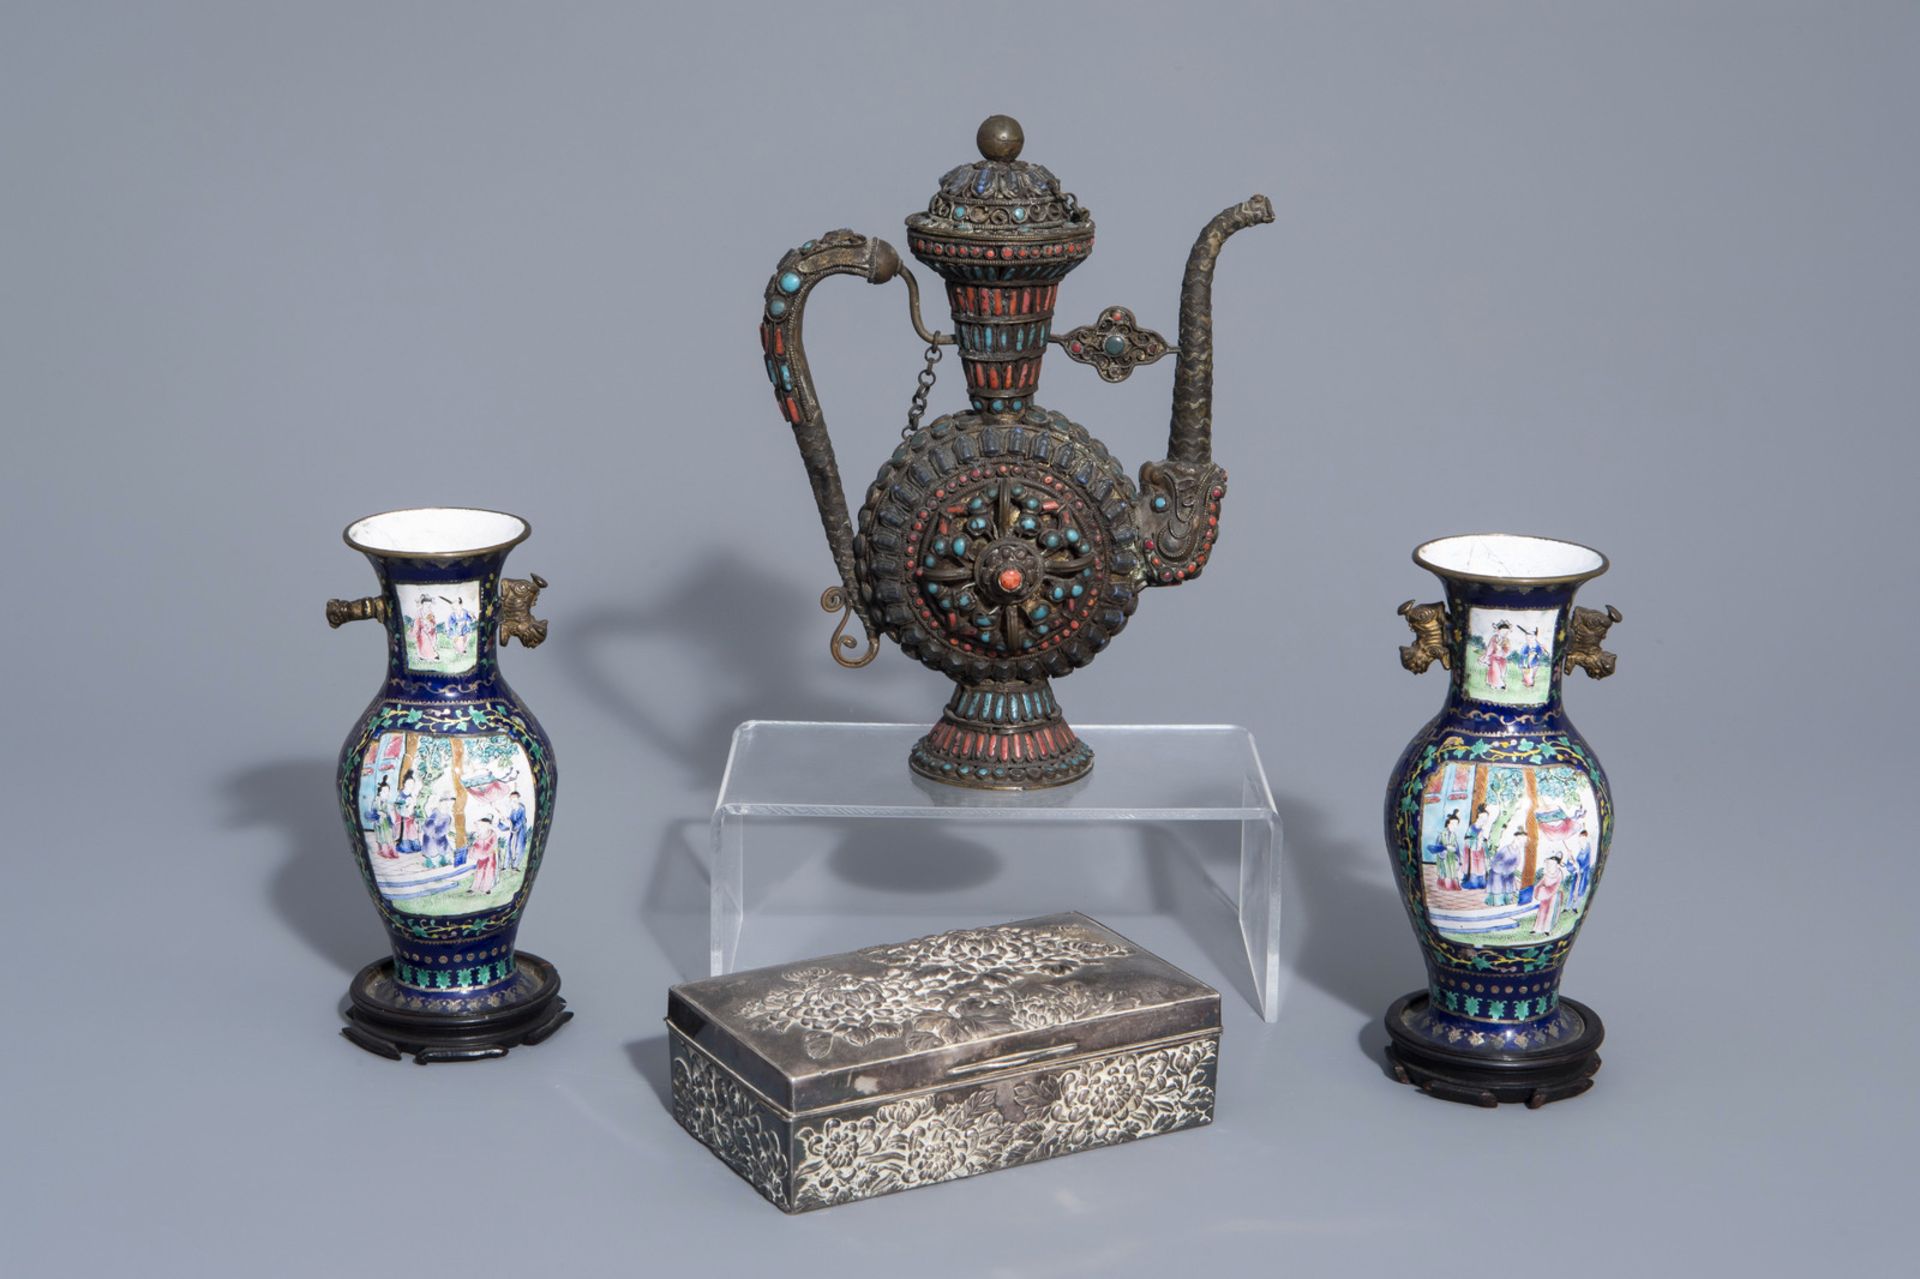 A Chinese silver box and cover with floral design, a pair of cloisonnŽ vases and a Tibetan ewer with